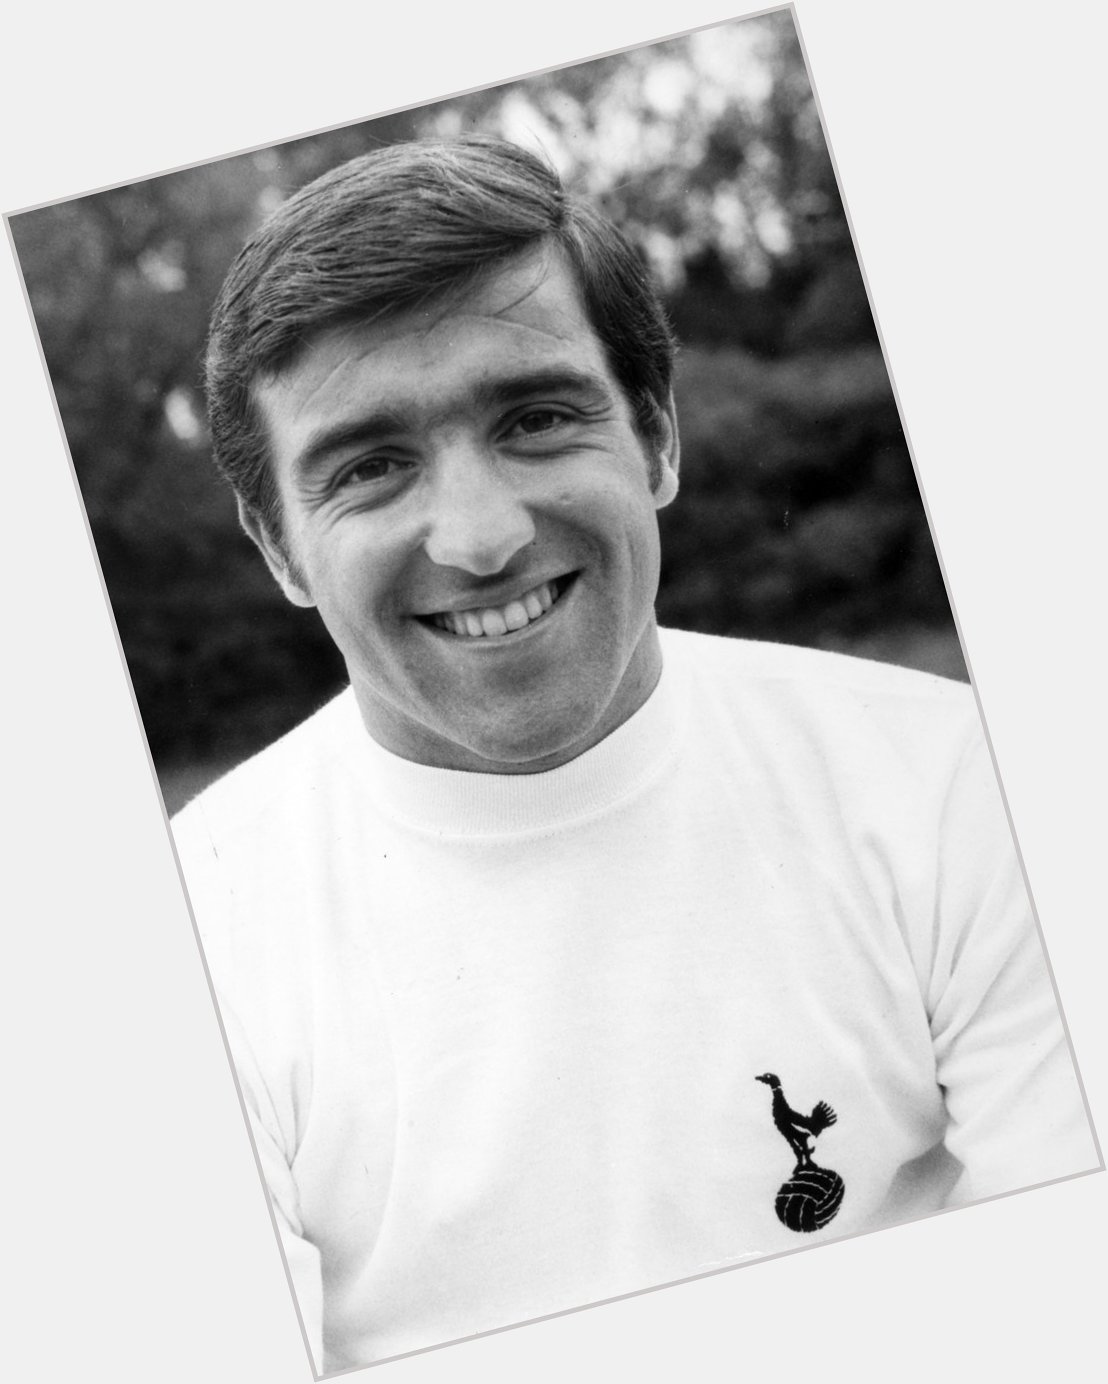 Happy birthday to our former player and manager, Terry Venables. 